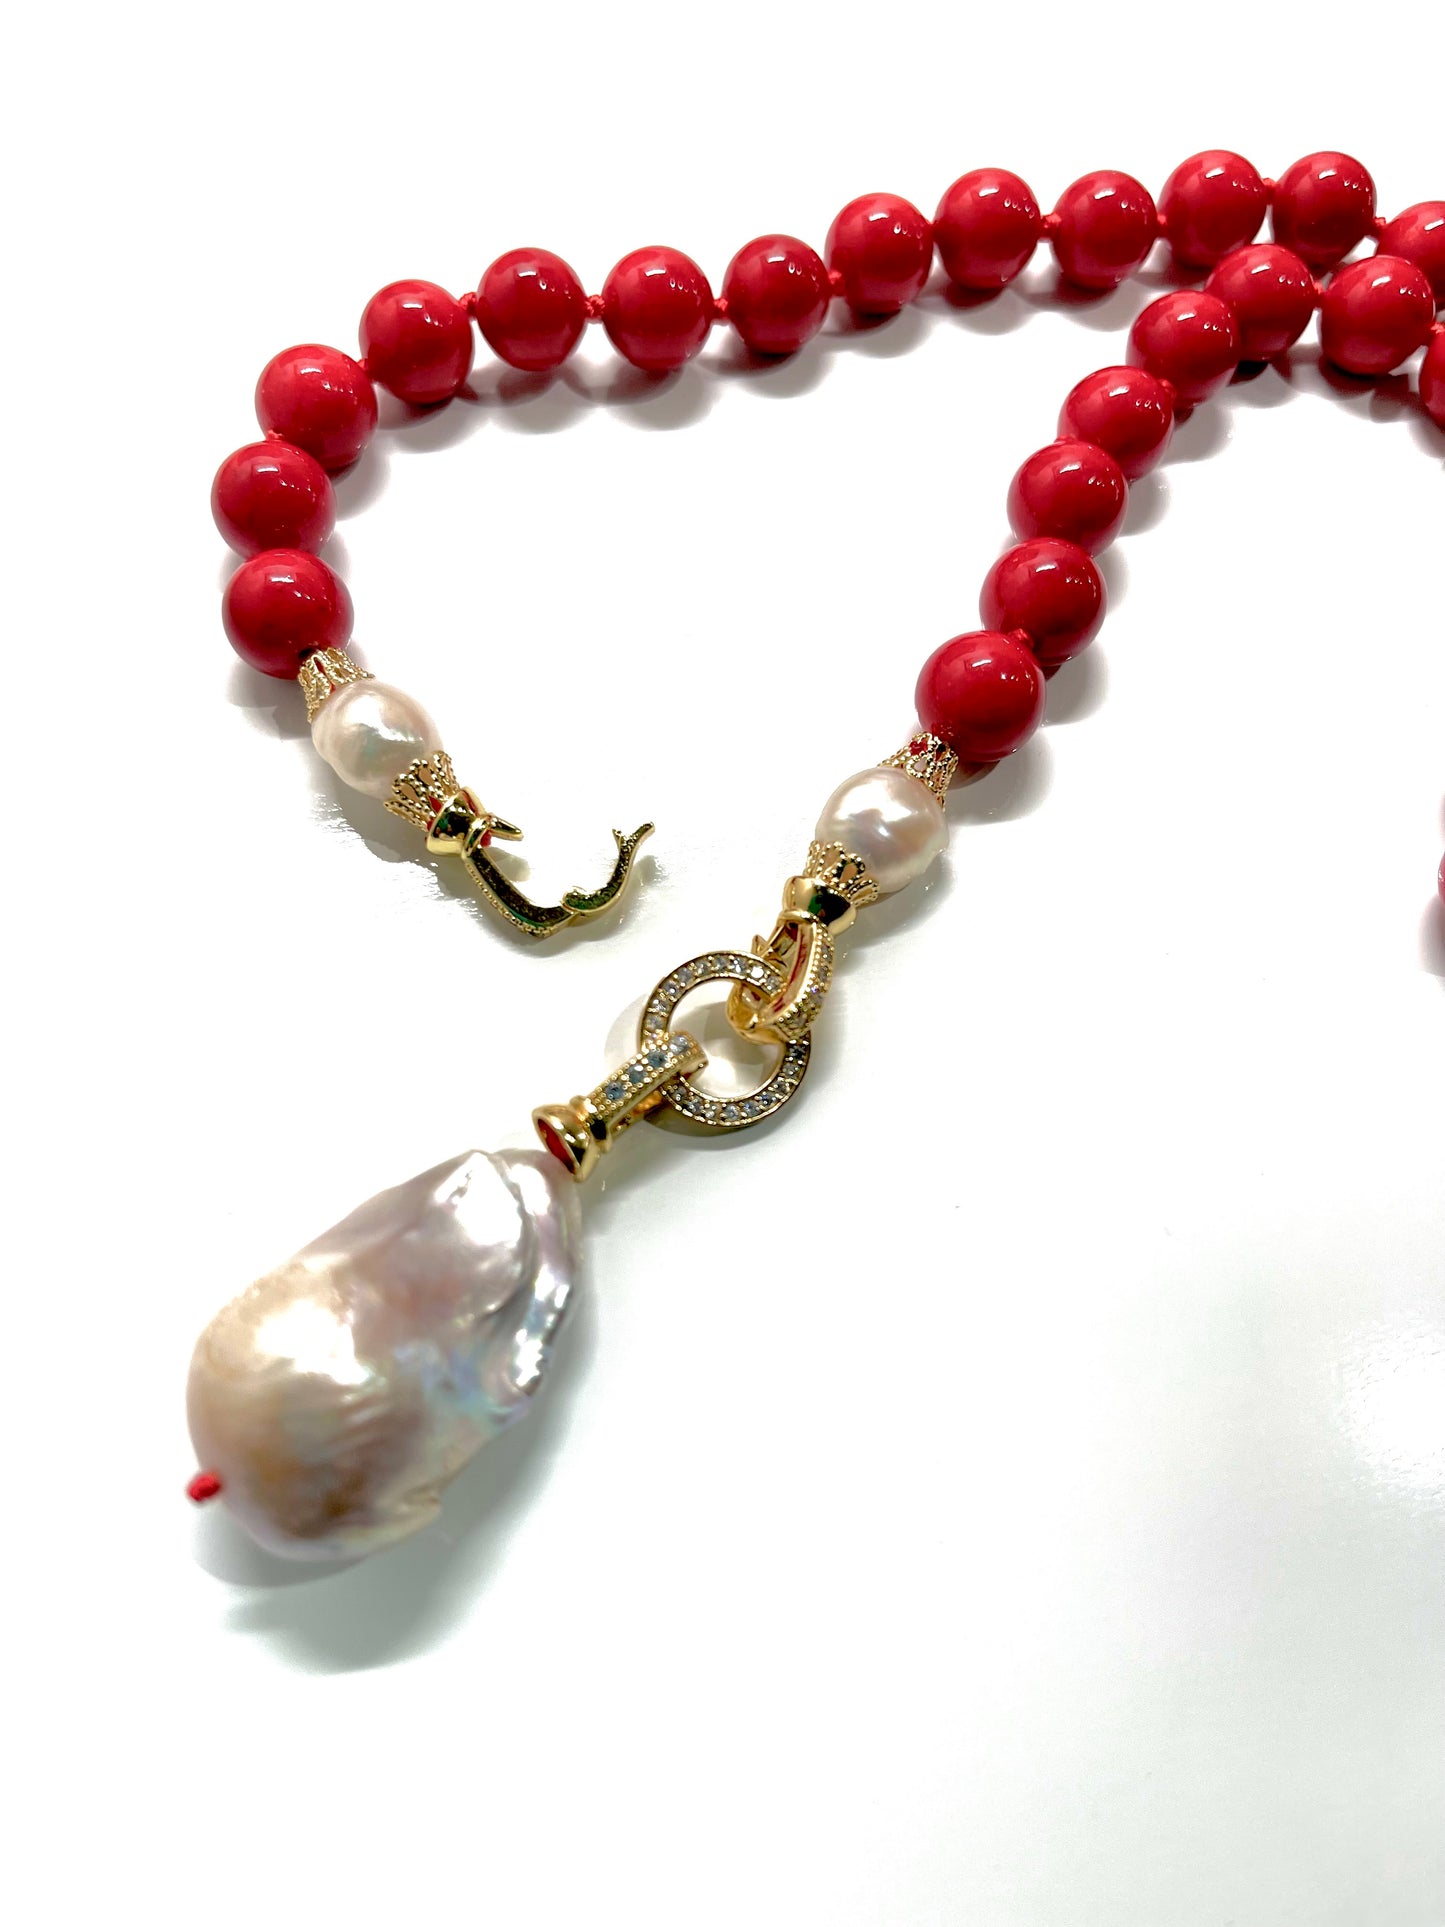 Rare Keshi Pearl and Red Gemstone Double-Knotted Statement Necklace 18"